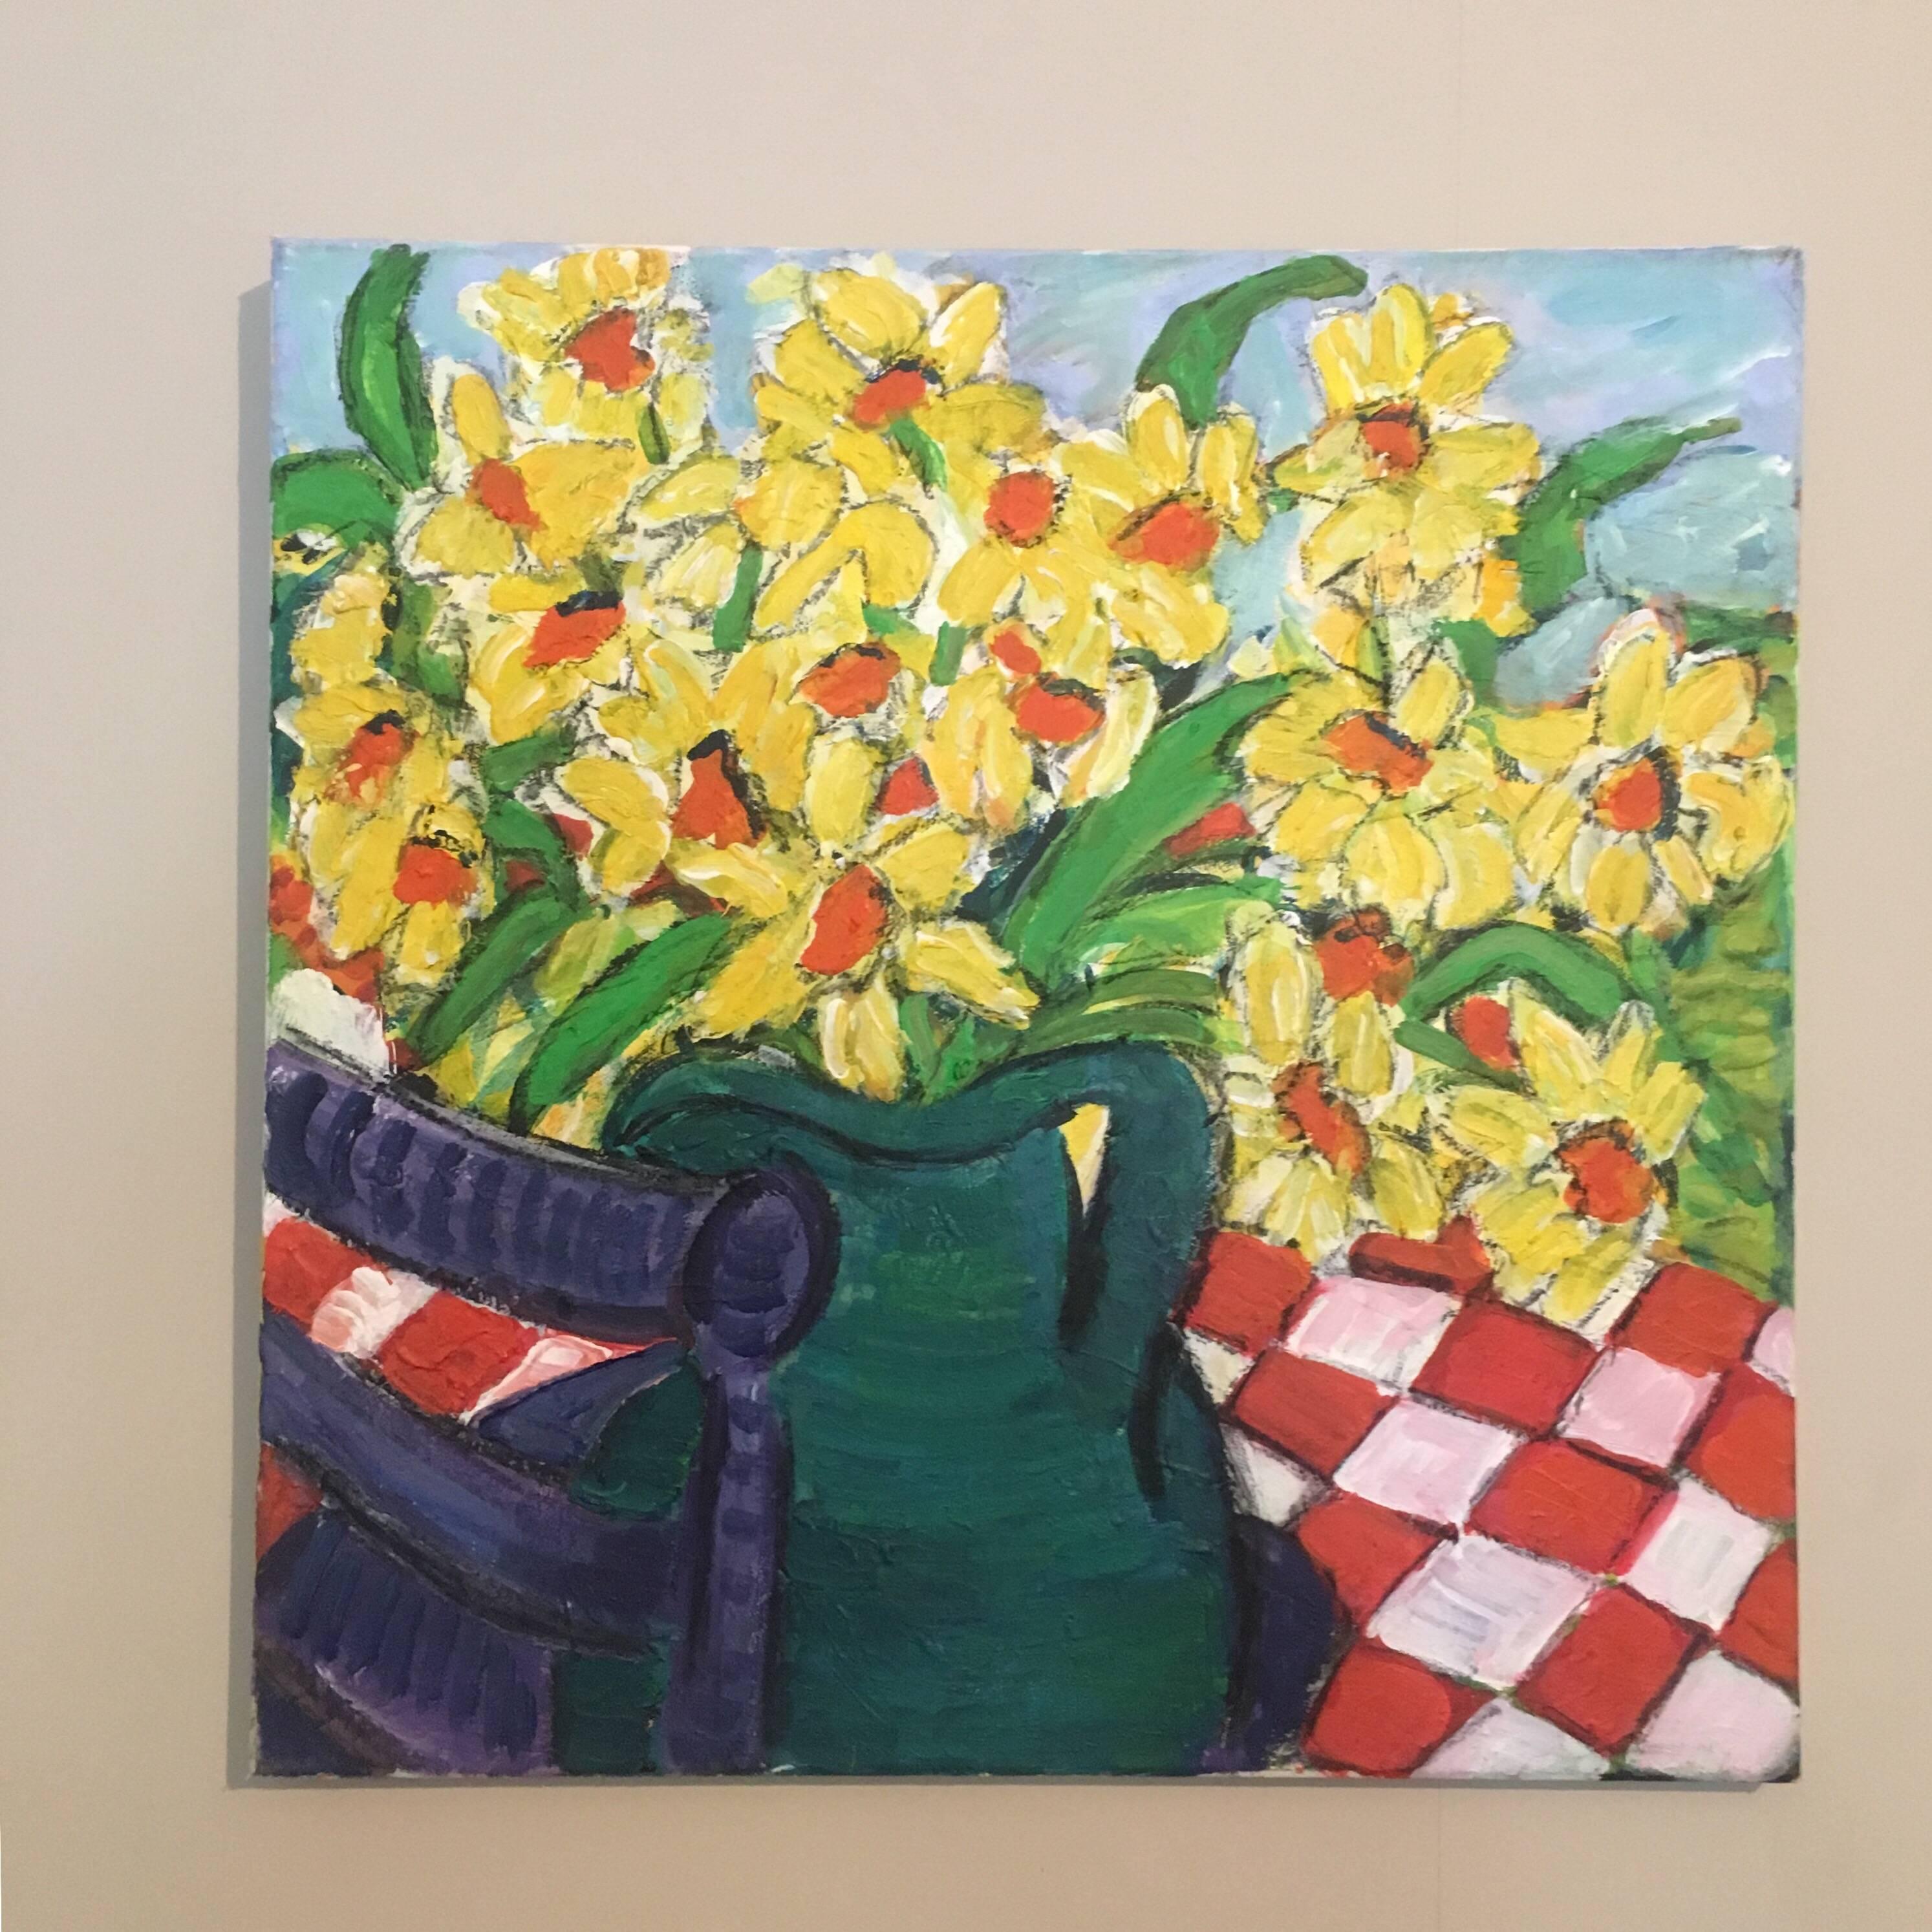 Daffodils in a Green Vase Flower Oil Painting, British Artist - Brown Still-Life Painting by Pamela Cawley